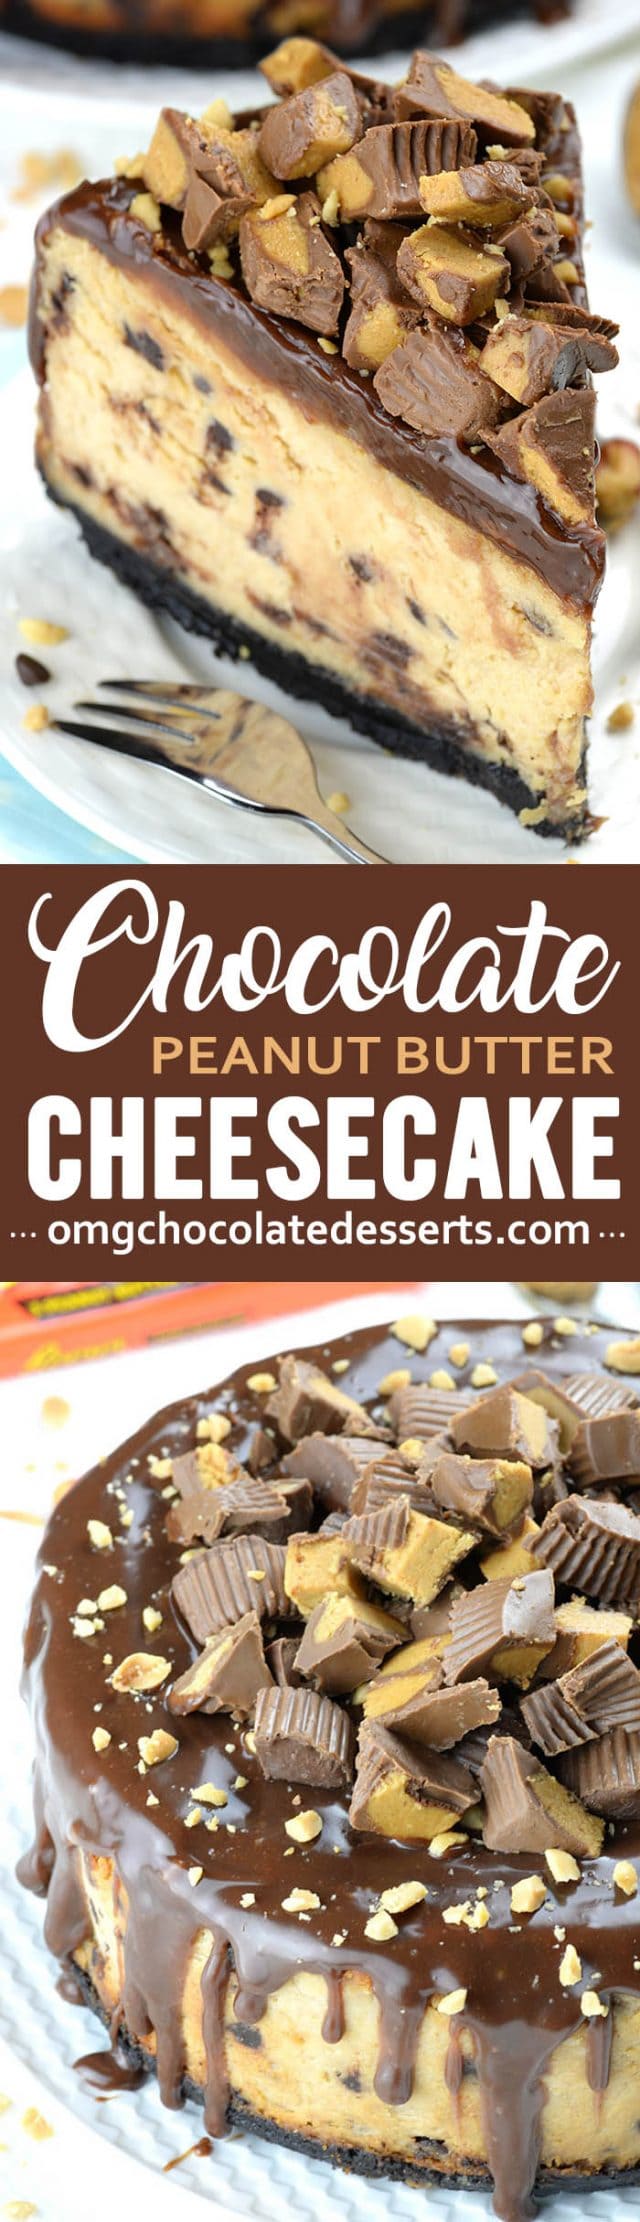 Chocolate Peanut Butter Cheesecake | An Easy Reese's Cup Cheesecake